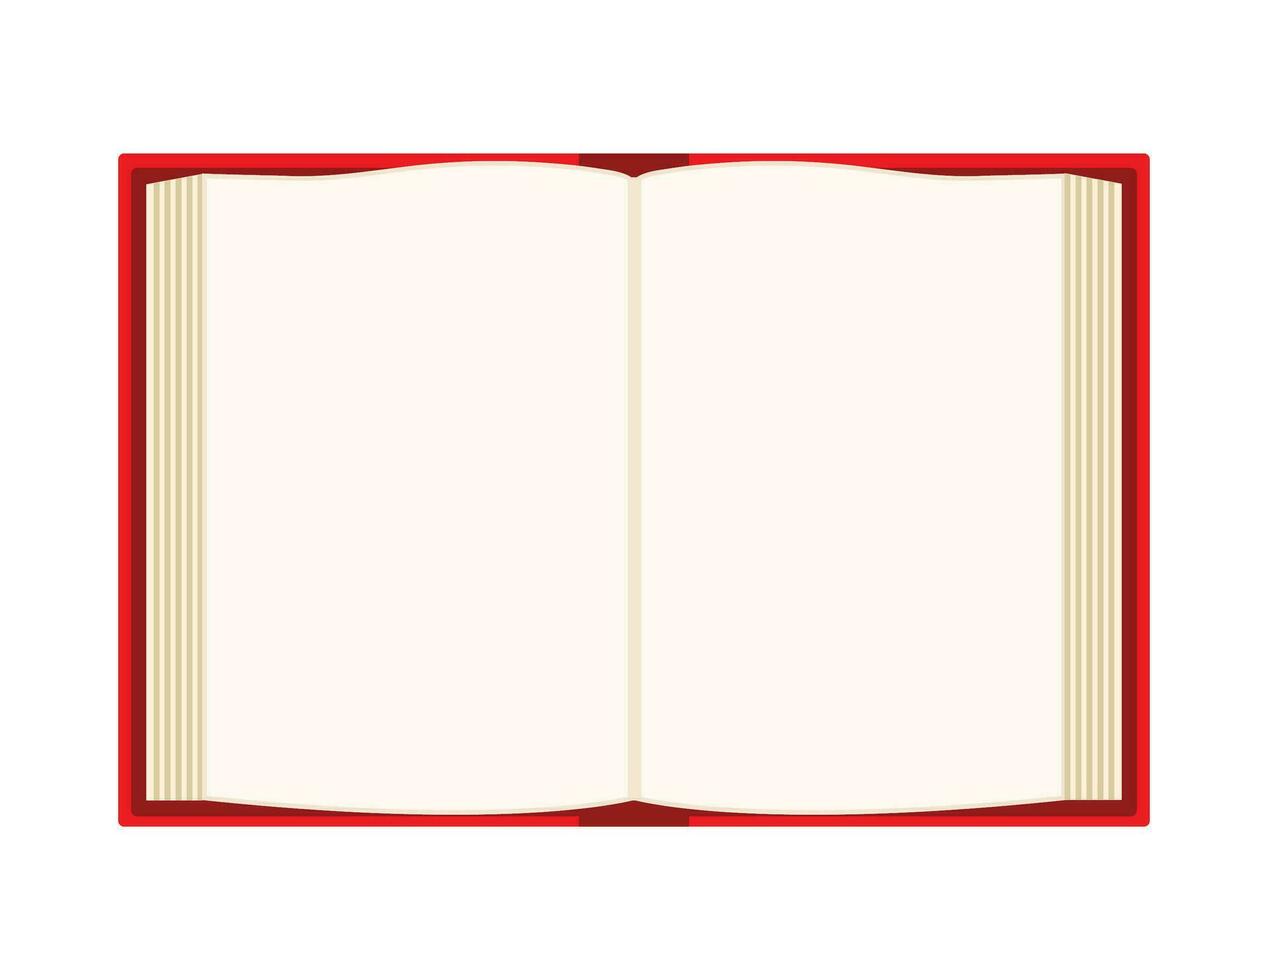 Open book over white background. Red book. Blank pages. Vector illustration.